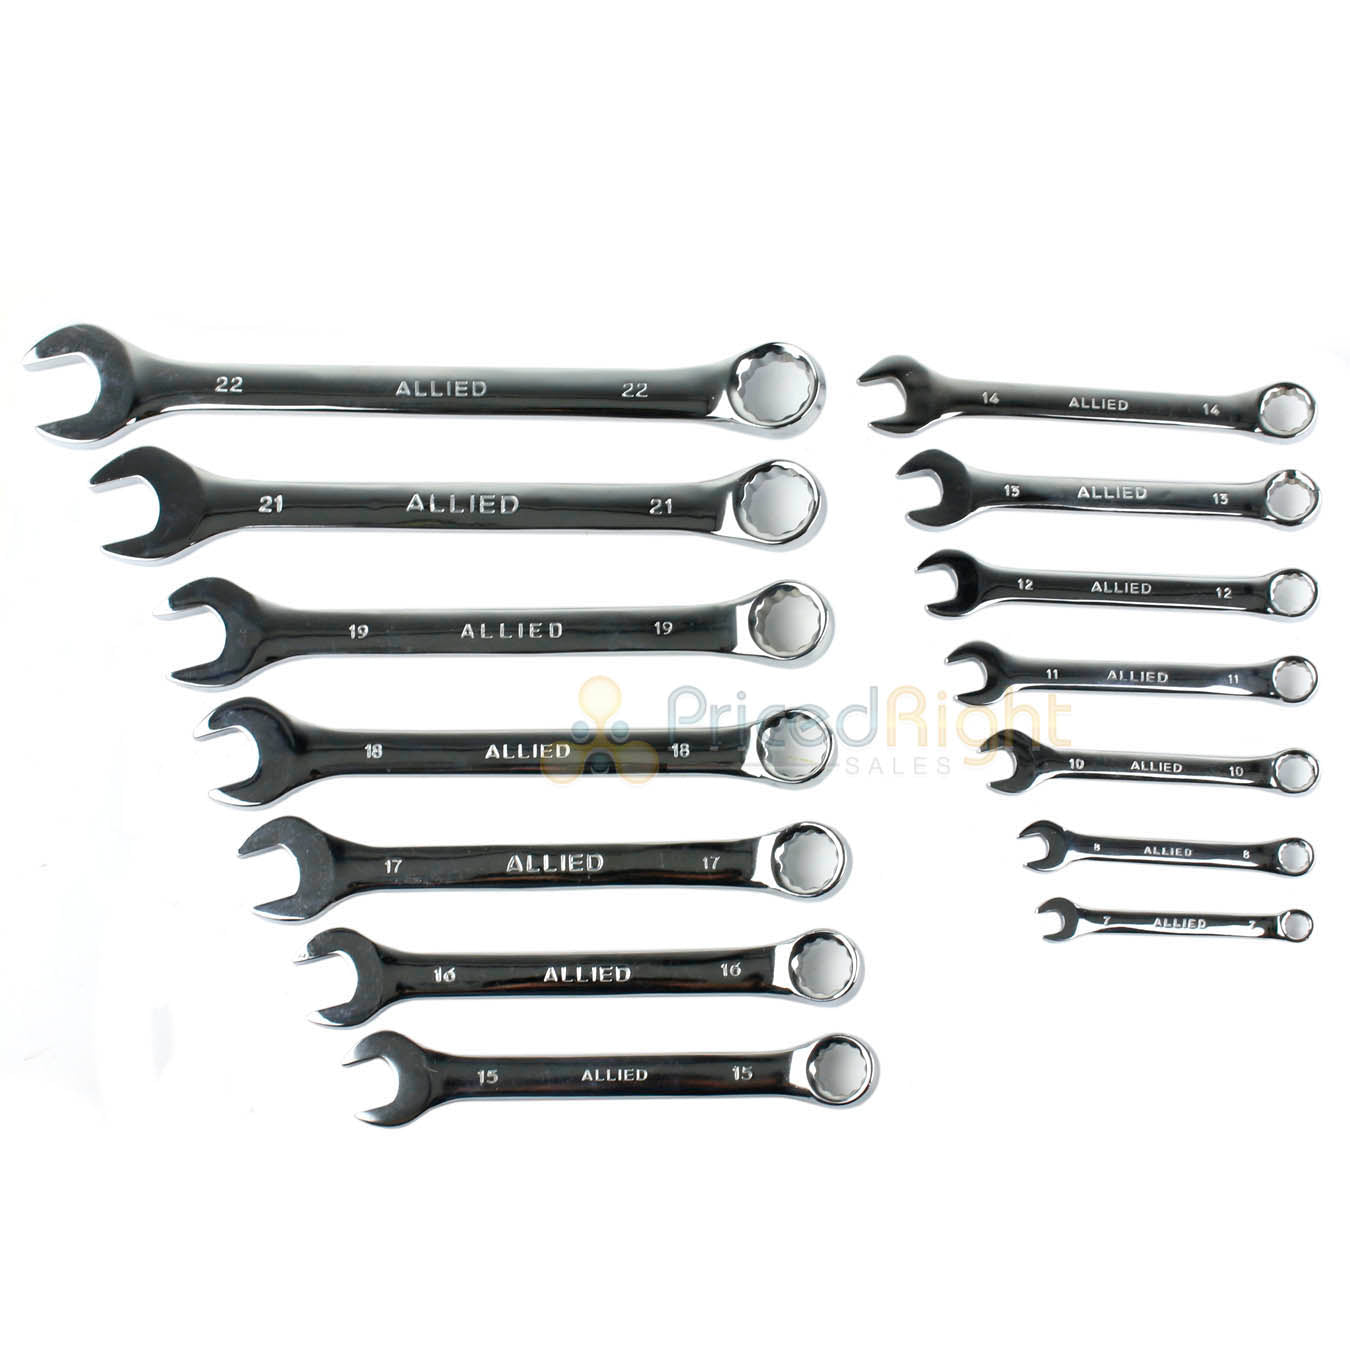 14 Piece Metric Combination Wrench Set 7mm to 22mm with Roll up Storage Pouch